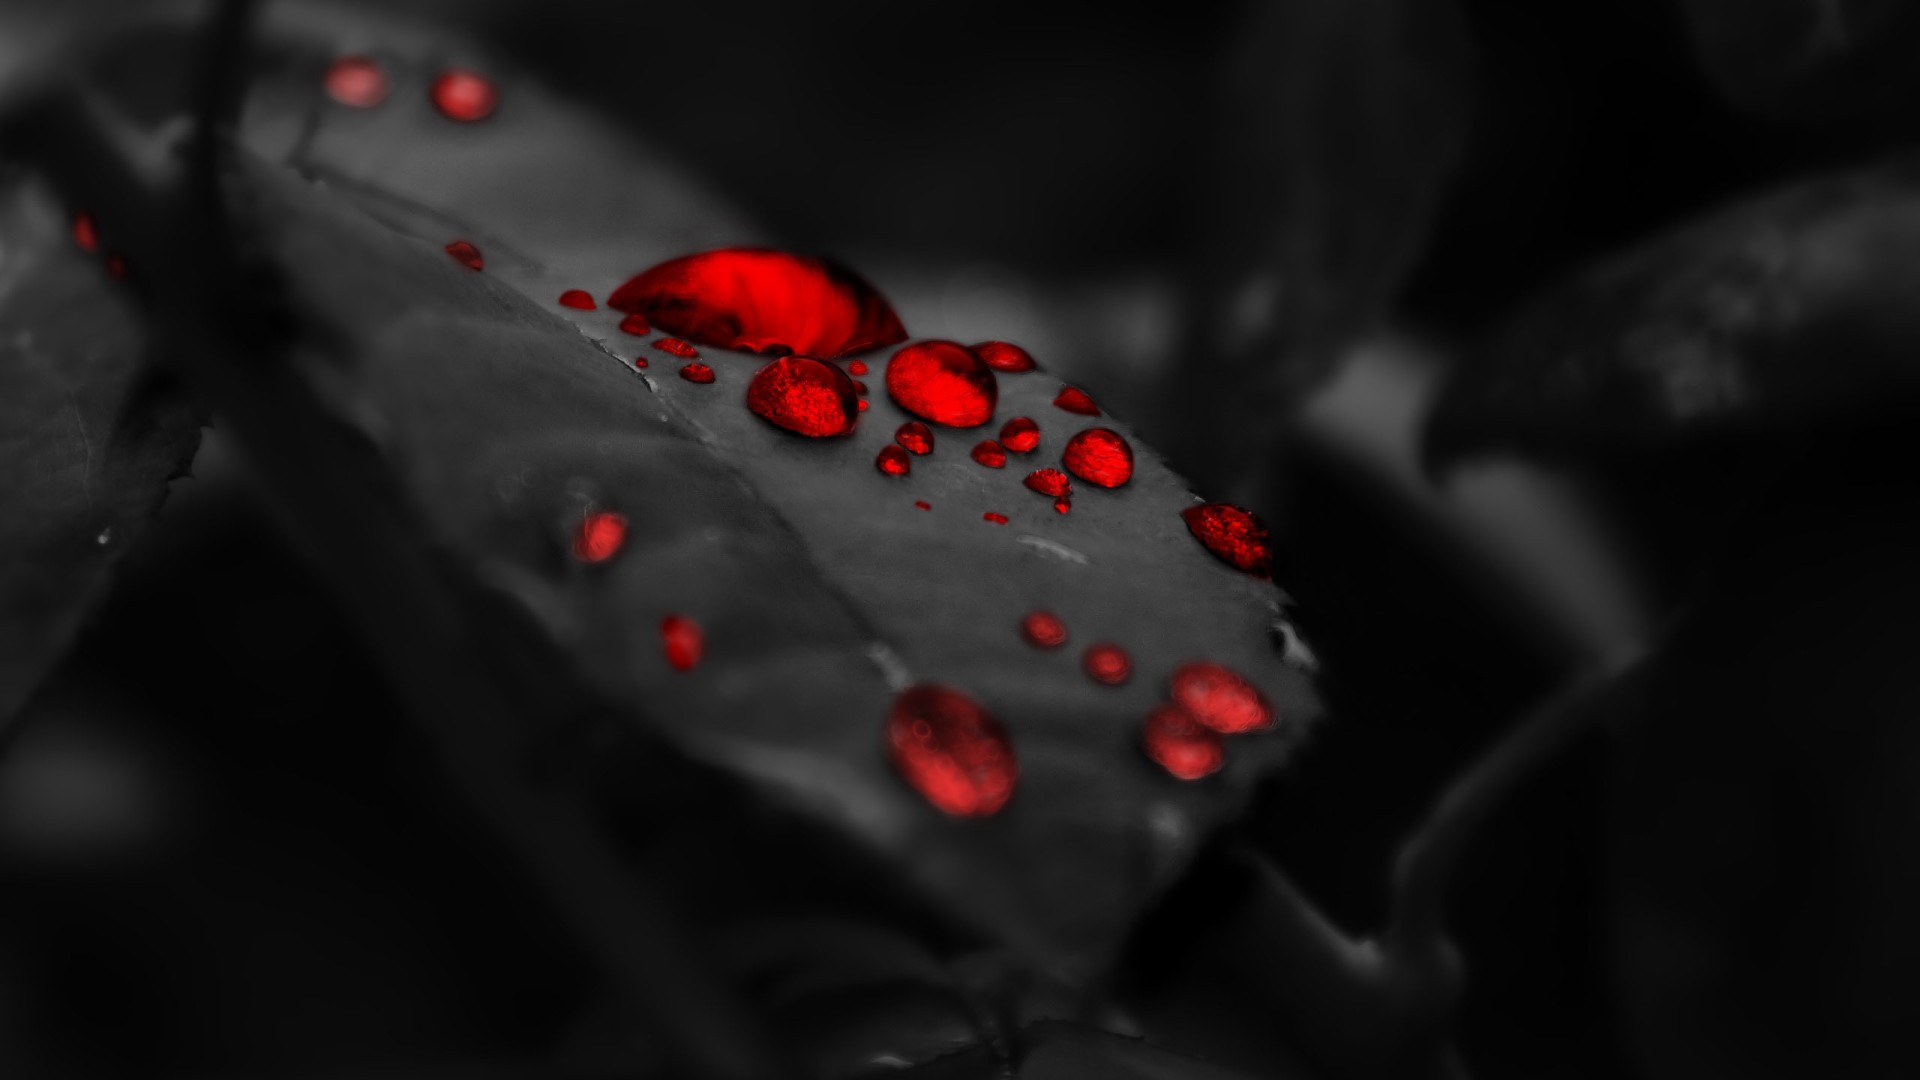 Wallpaper hd black and red